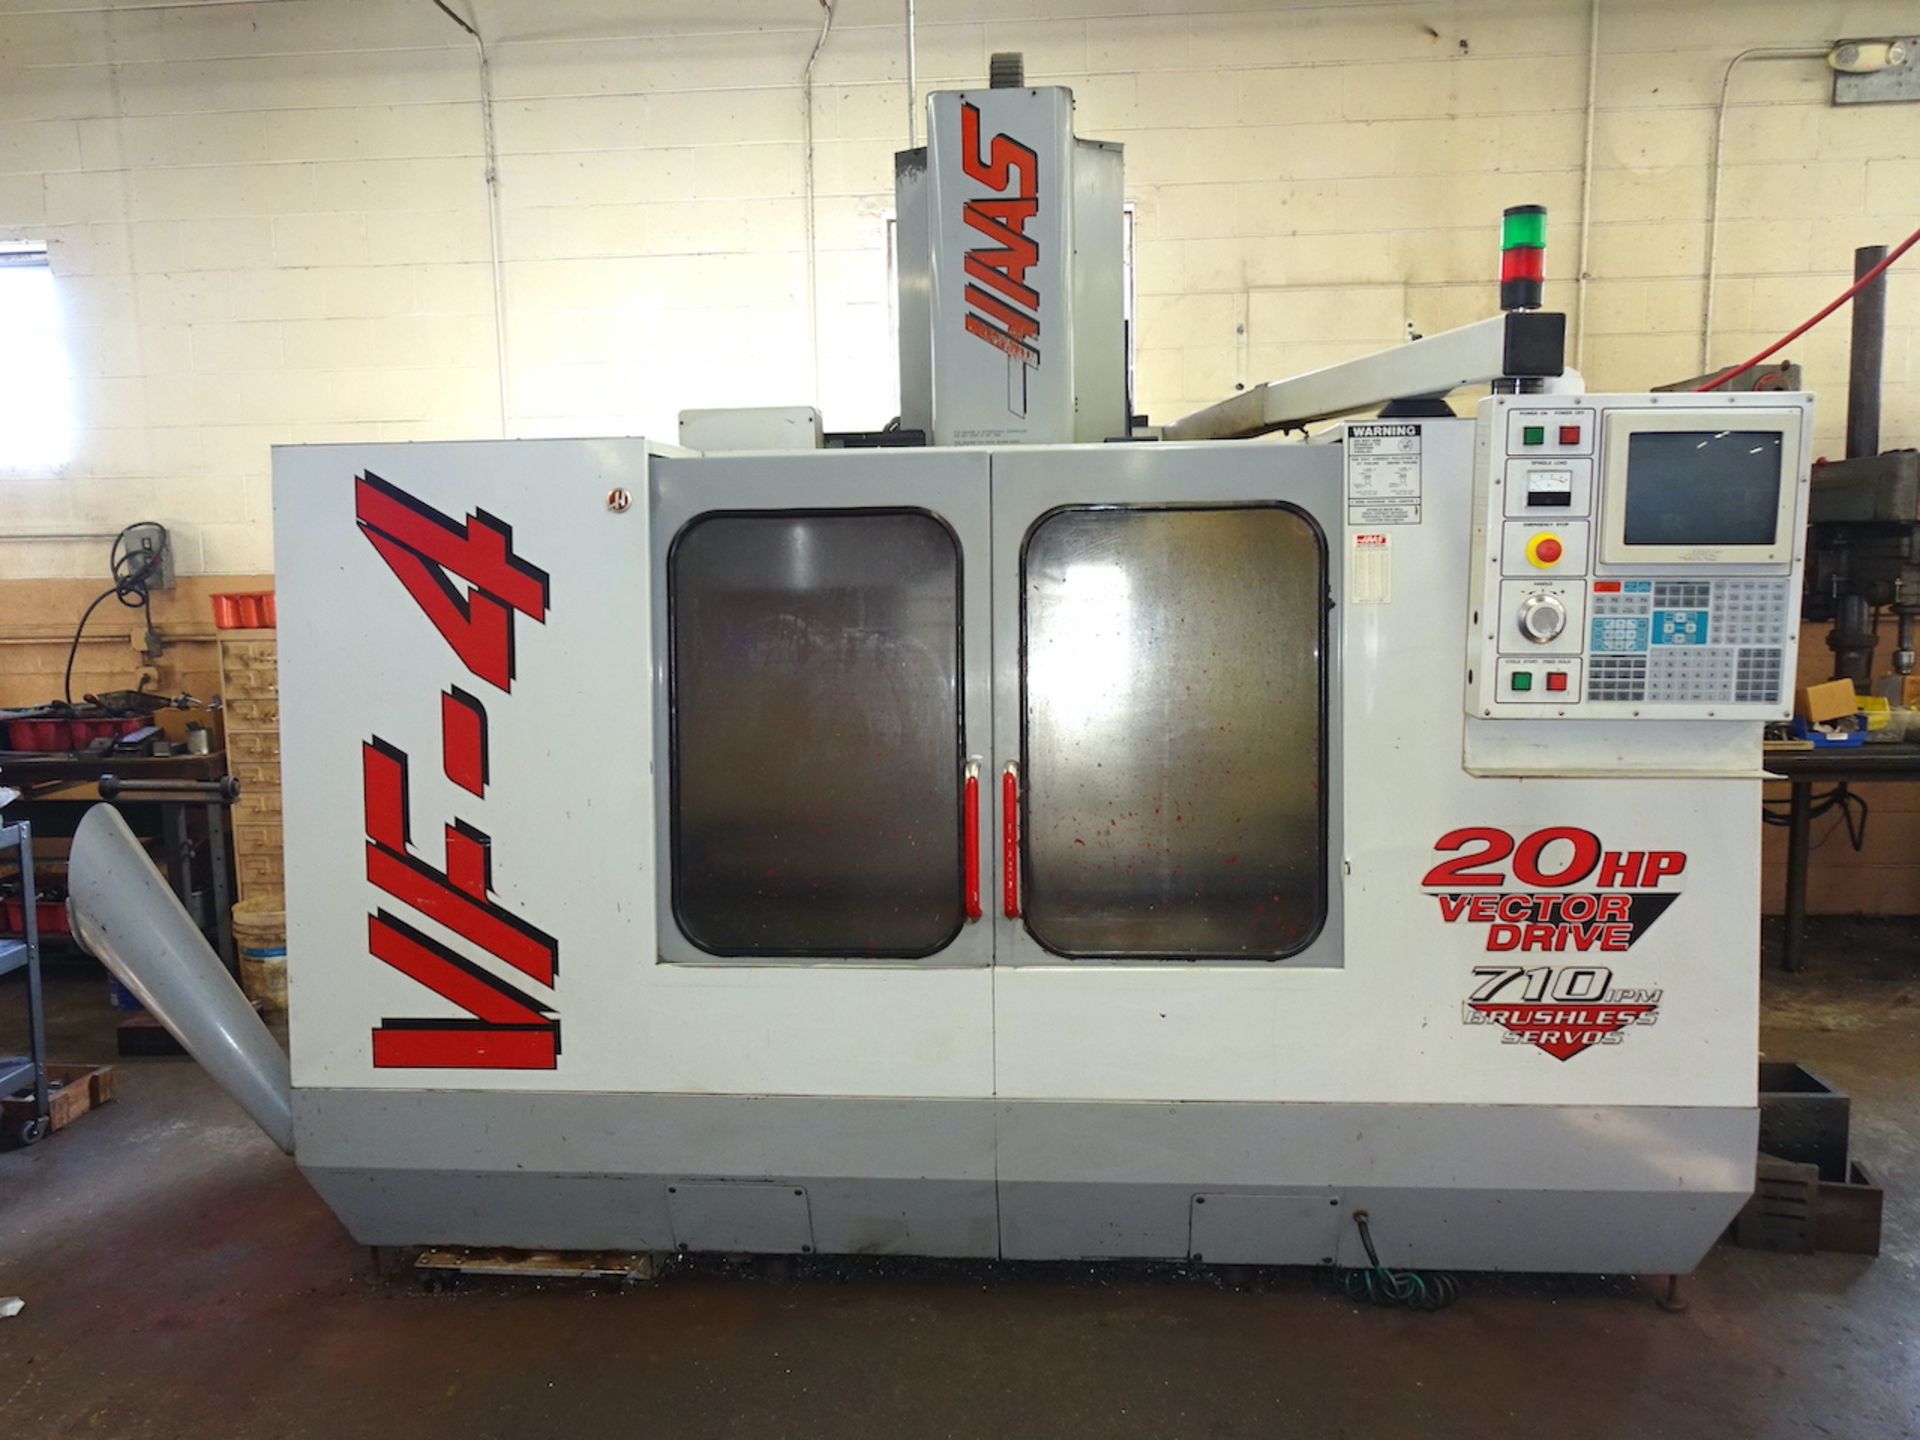 1998 Haas Model VF-4 CNC Vertical Machining Center, S/N 14860, 20 HP Vector Drive, 710 IPM Brushless - Image 3 of 13